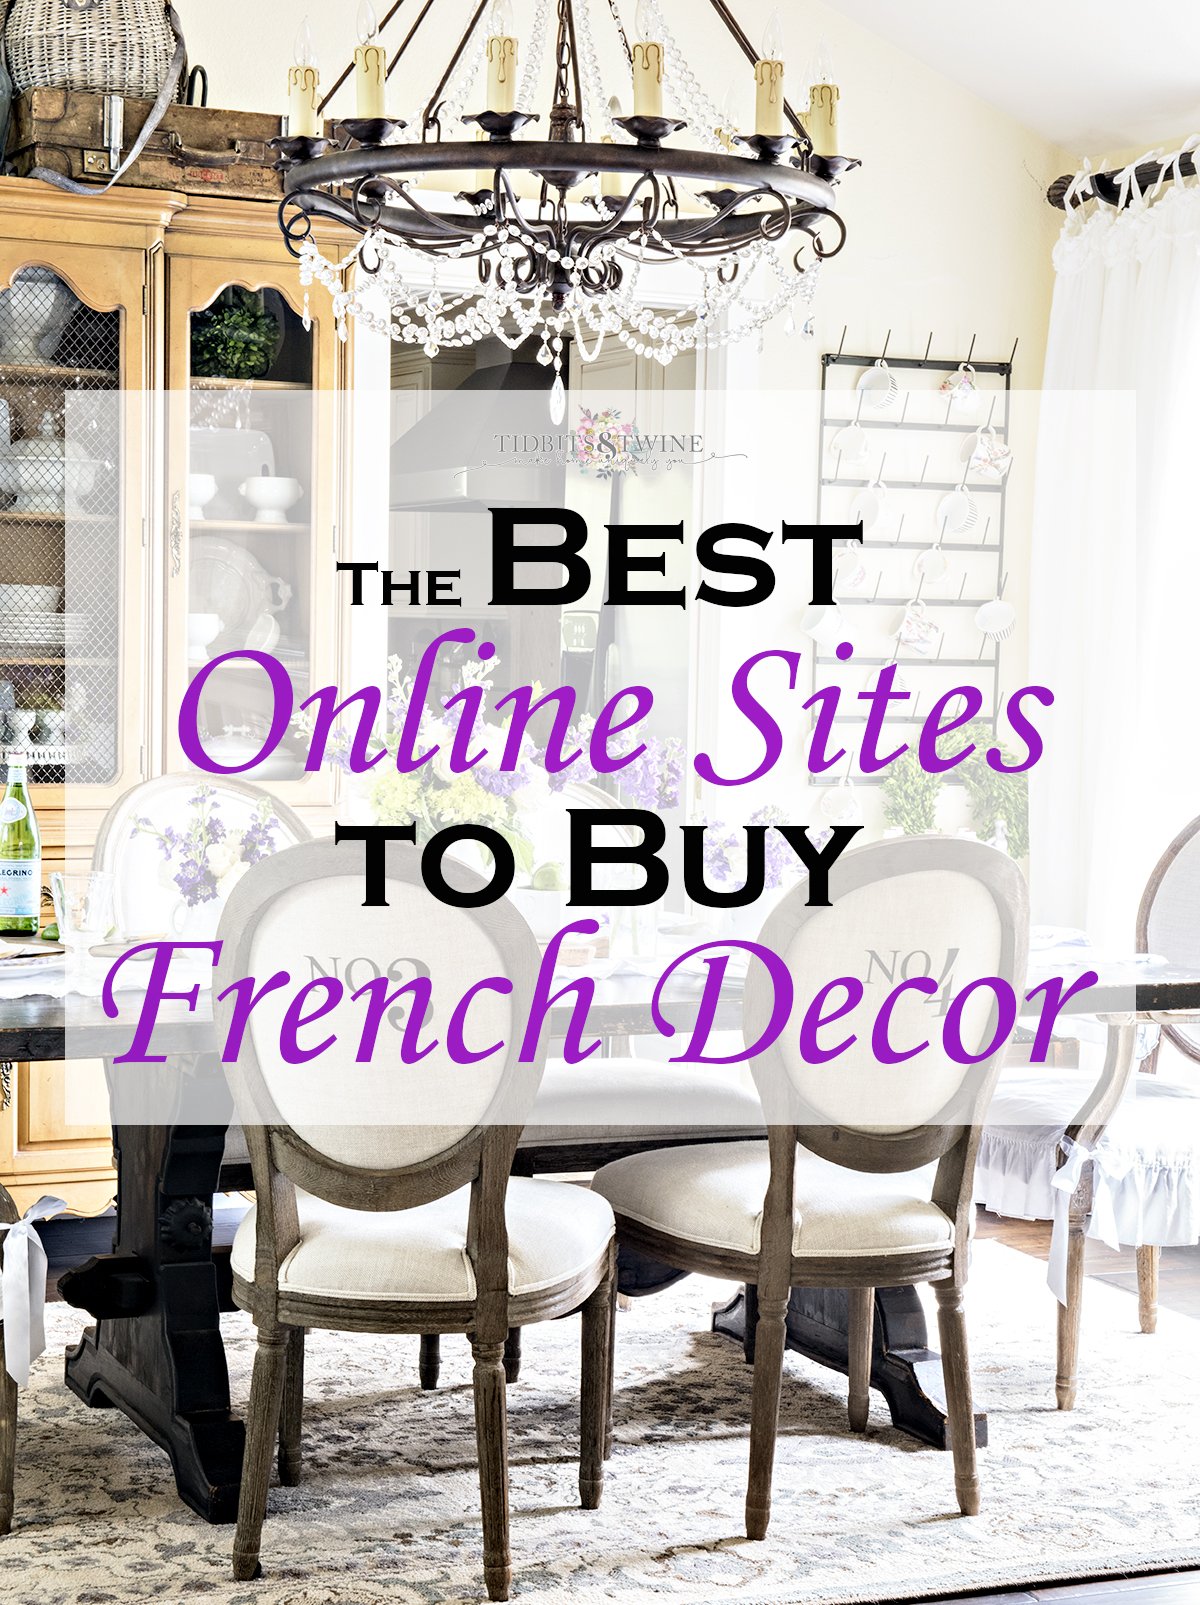 The BEST Online Shops for French Décor {Antiques & Reproductions}